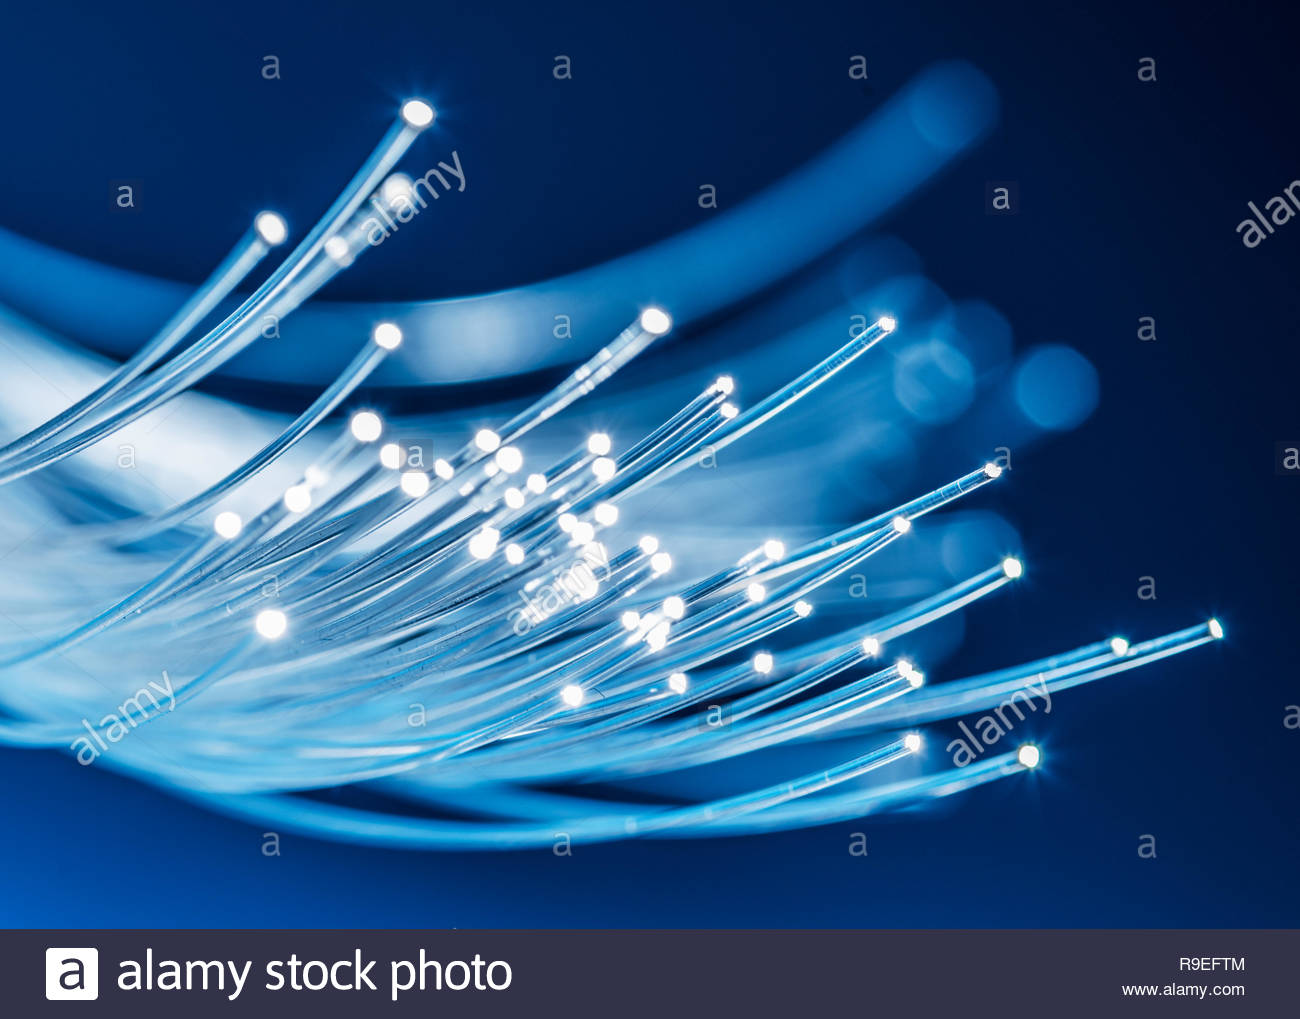 Bundle Of Optical Fibers With Lights In The Ends Blue Background